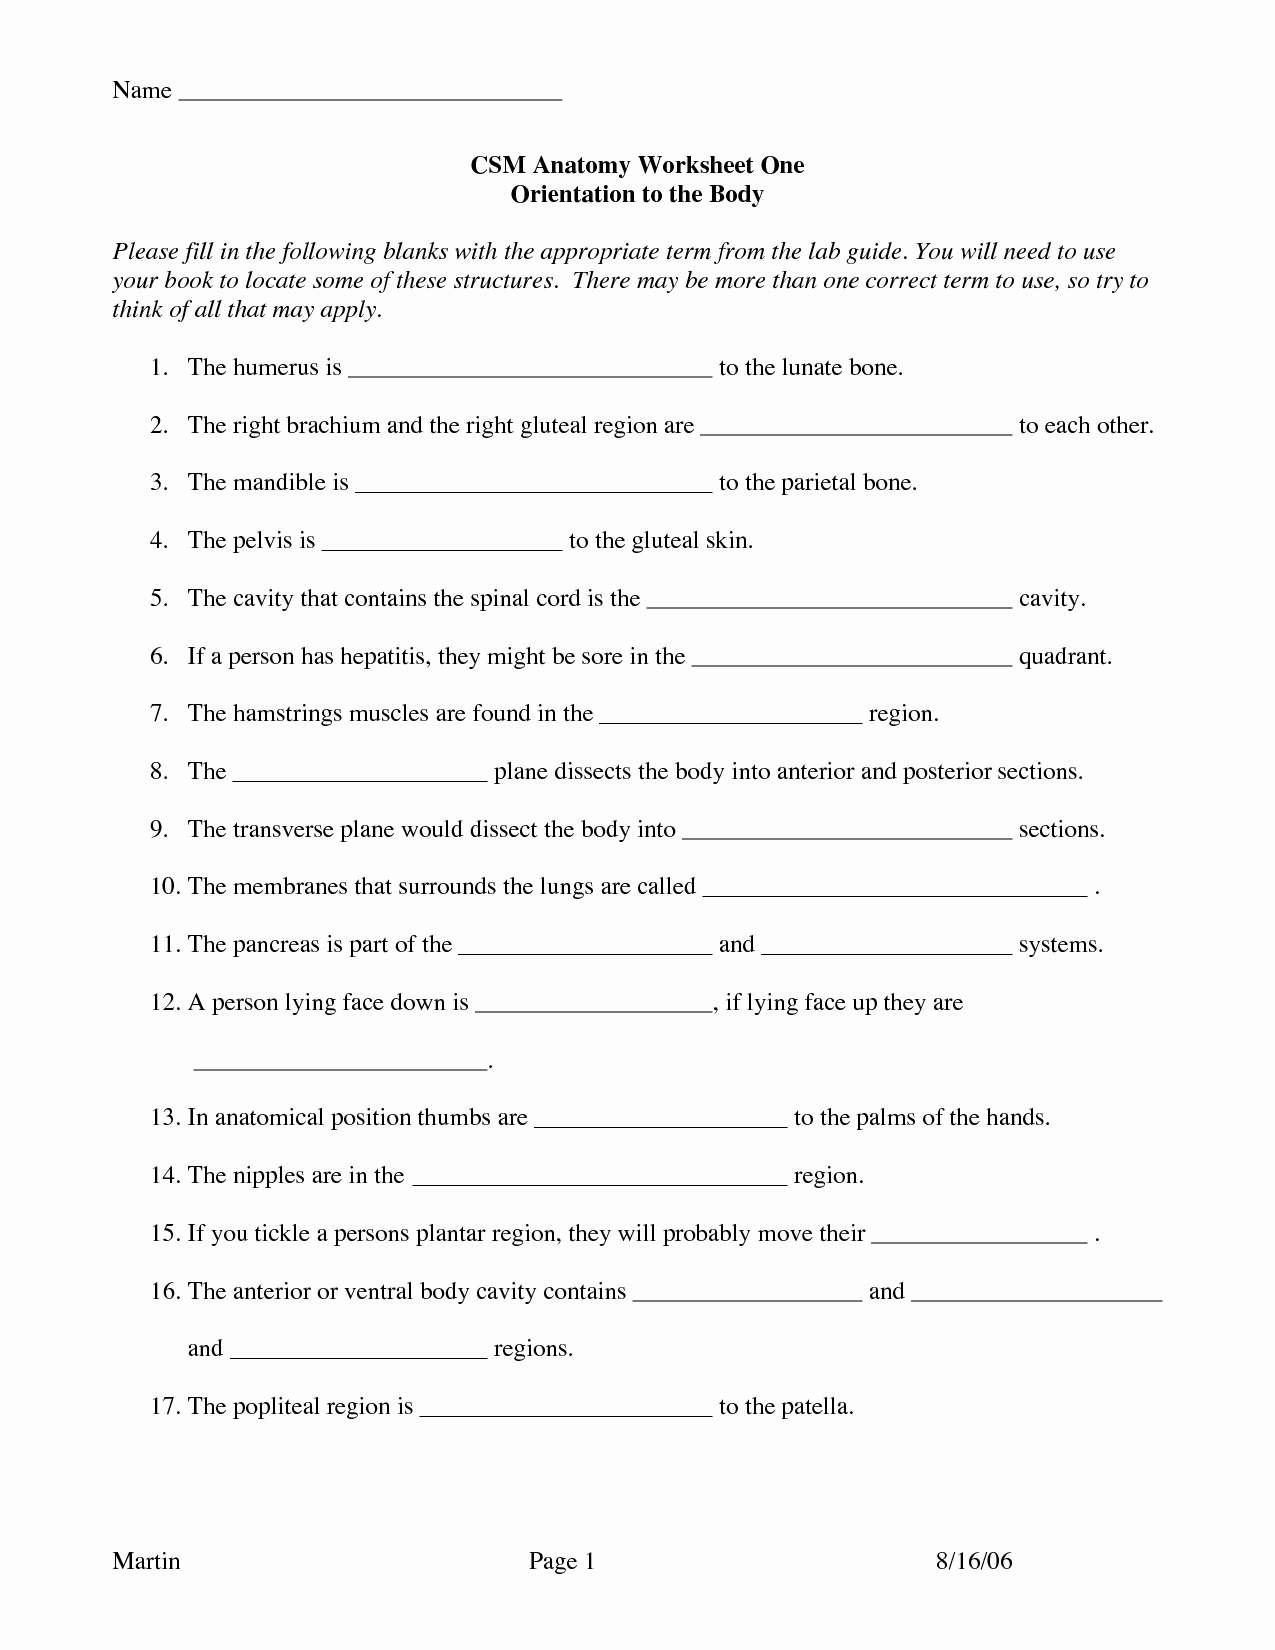 Anatomical Terms Worksheet Answers Luxury 17 Best Of Worksheets Human Anatomy Muscular